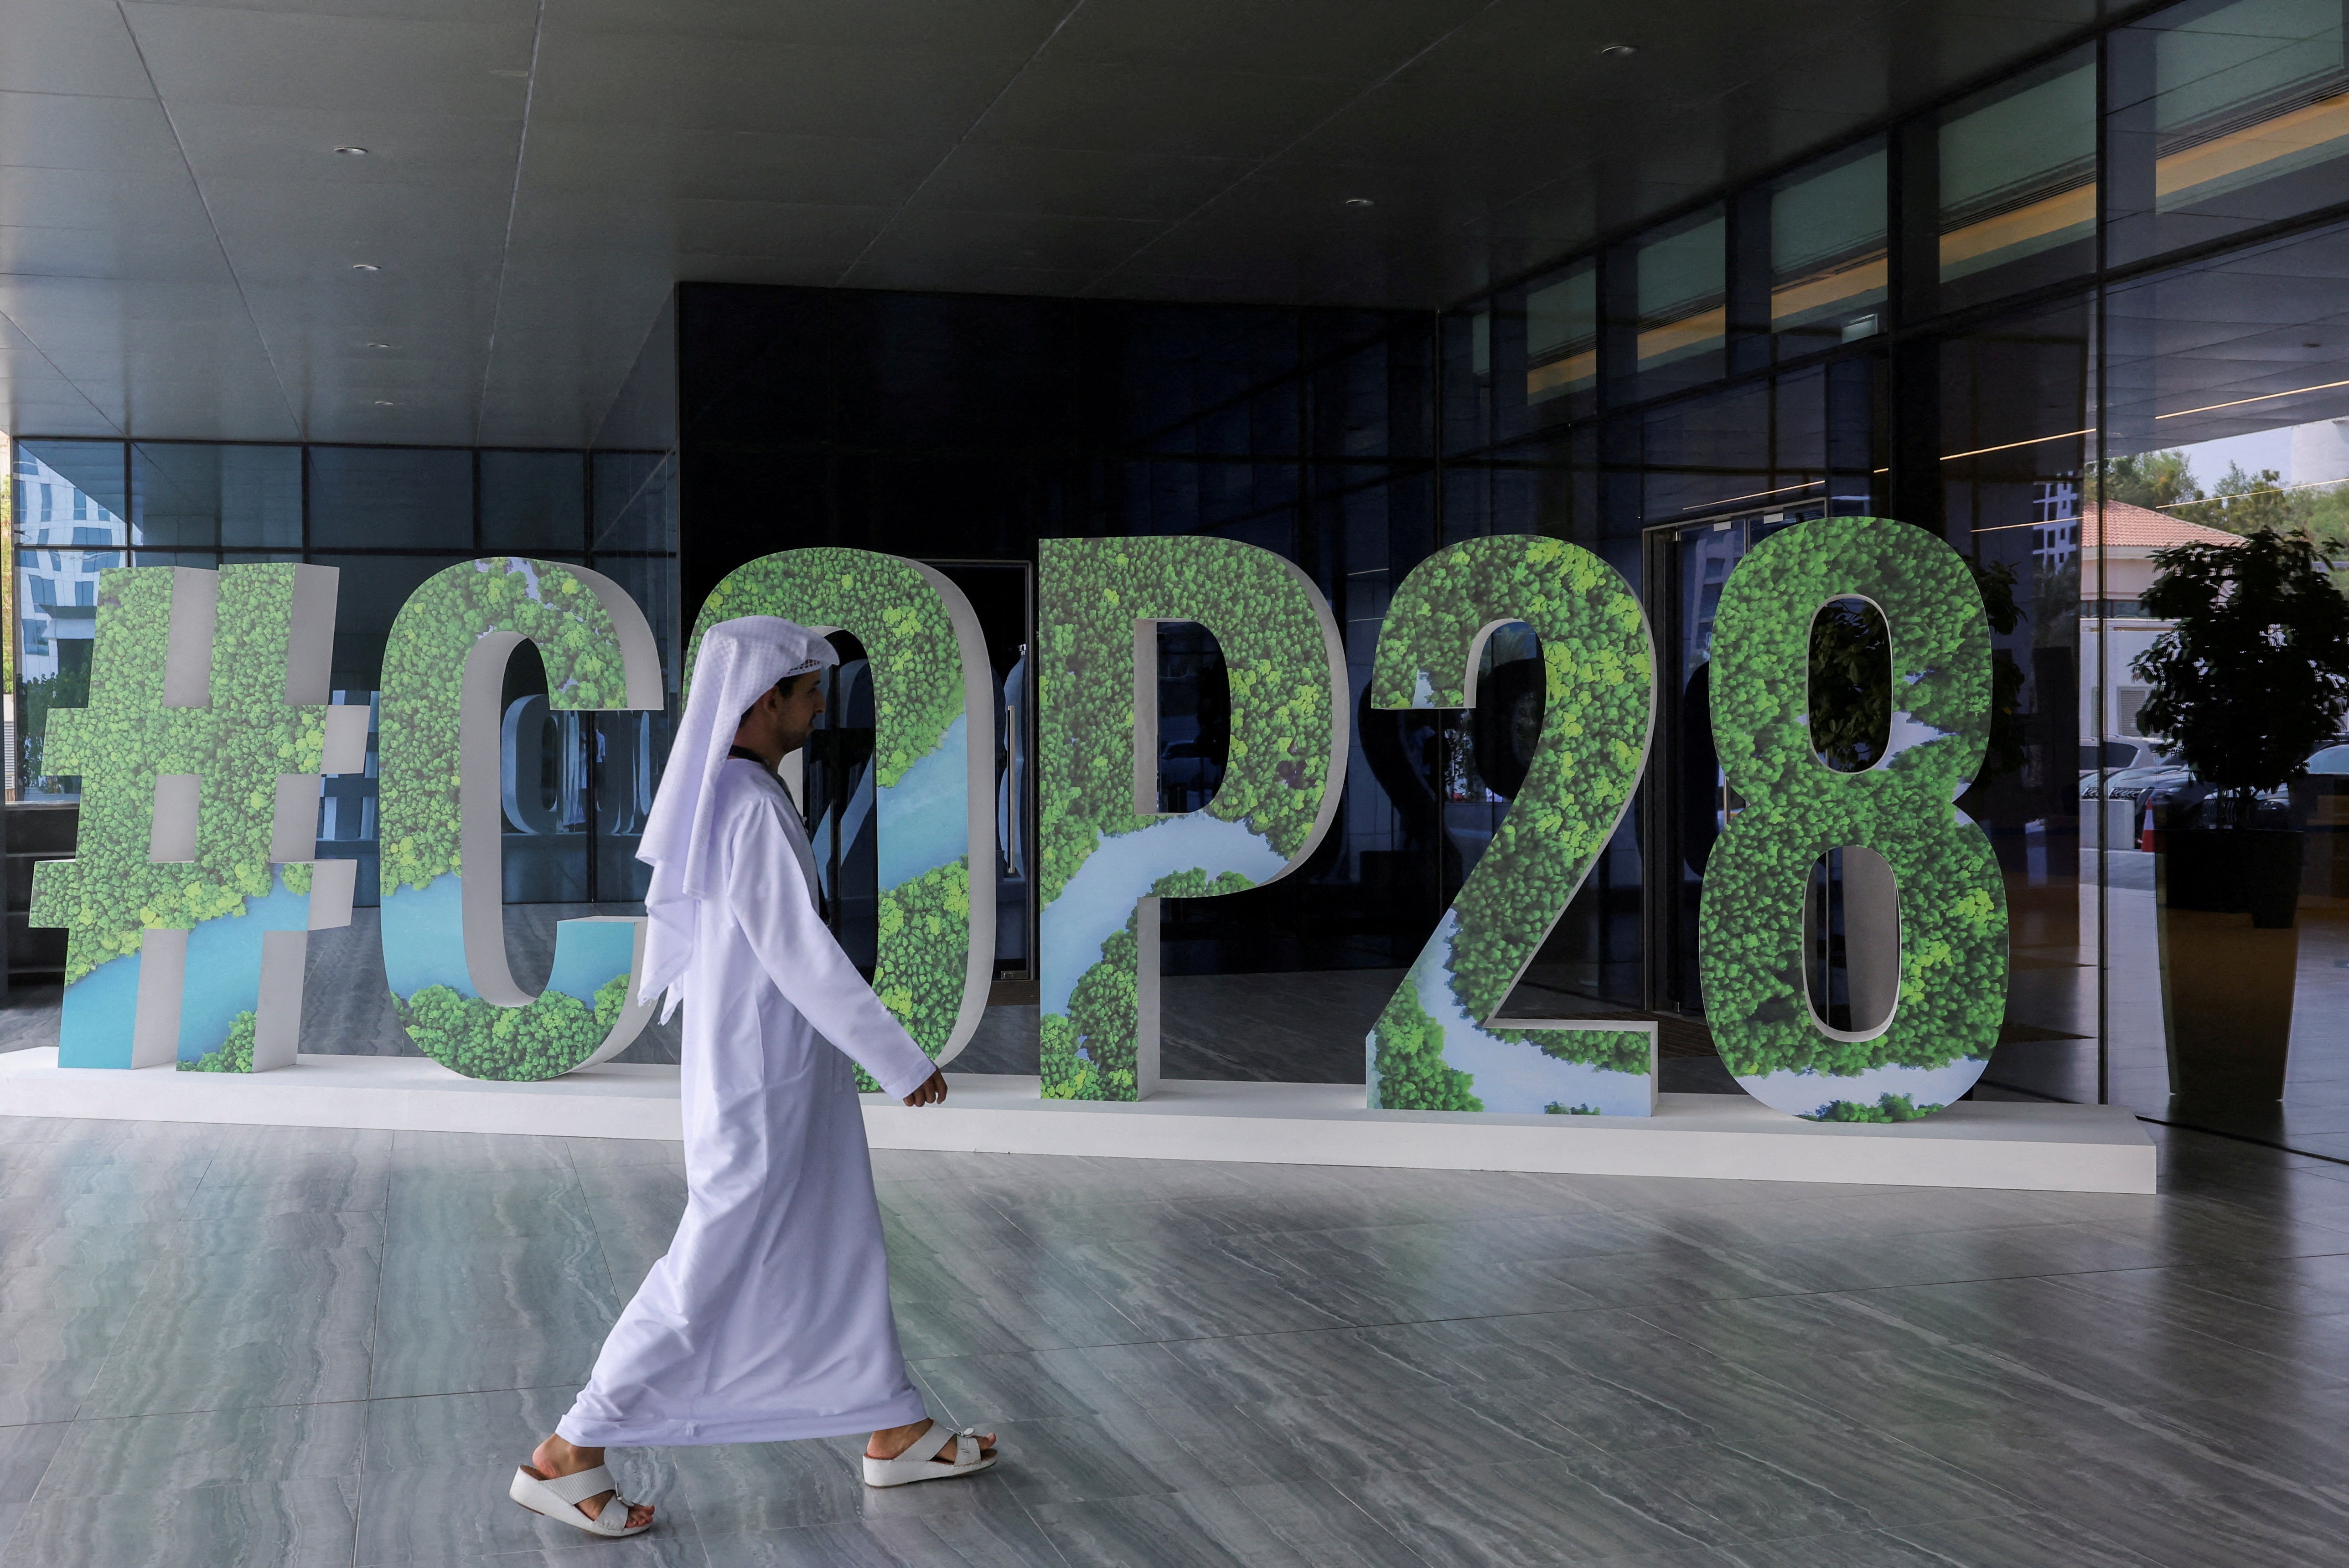 The Cop28 climate summit is being held in Dubai, the United Arab Emirates from 30 November - 12 December